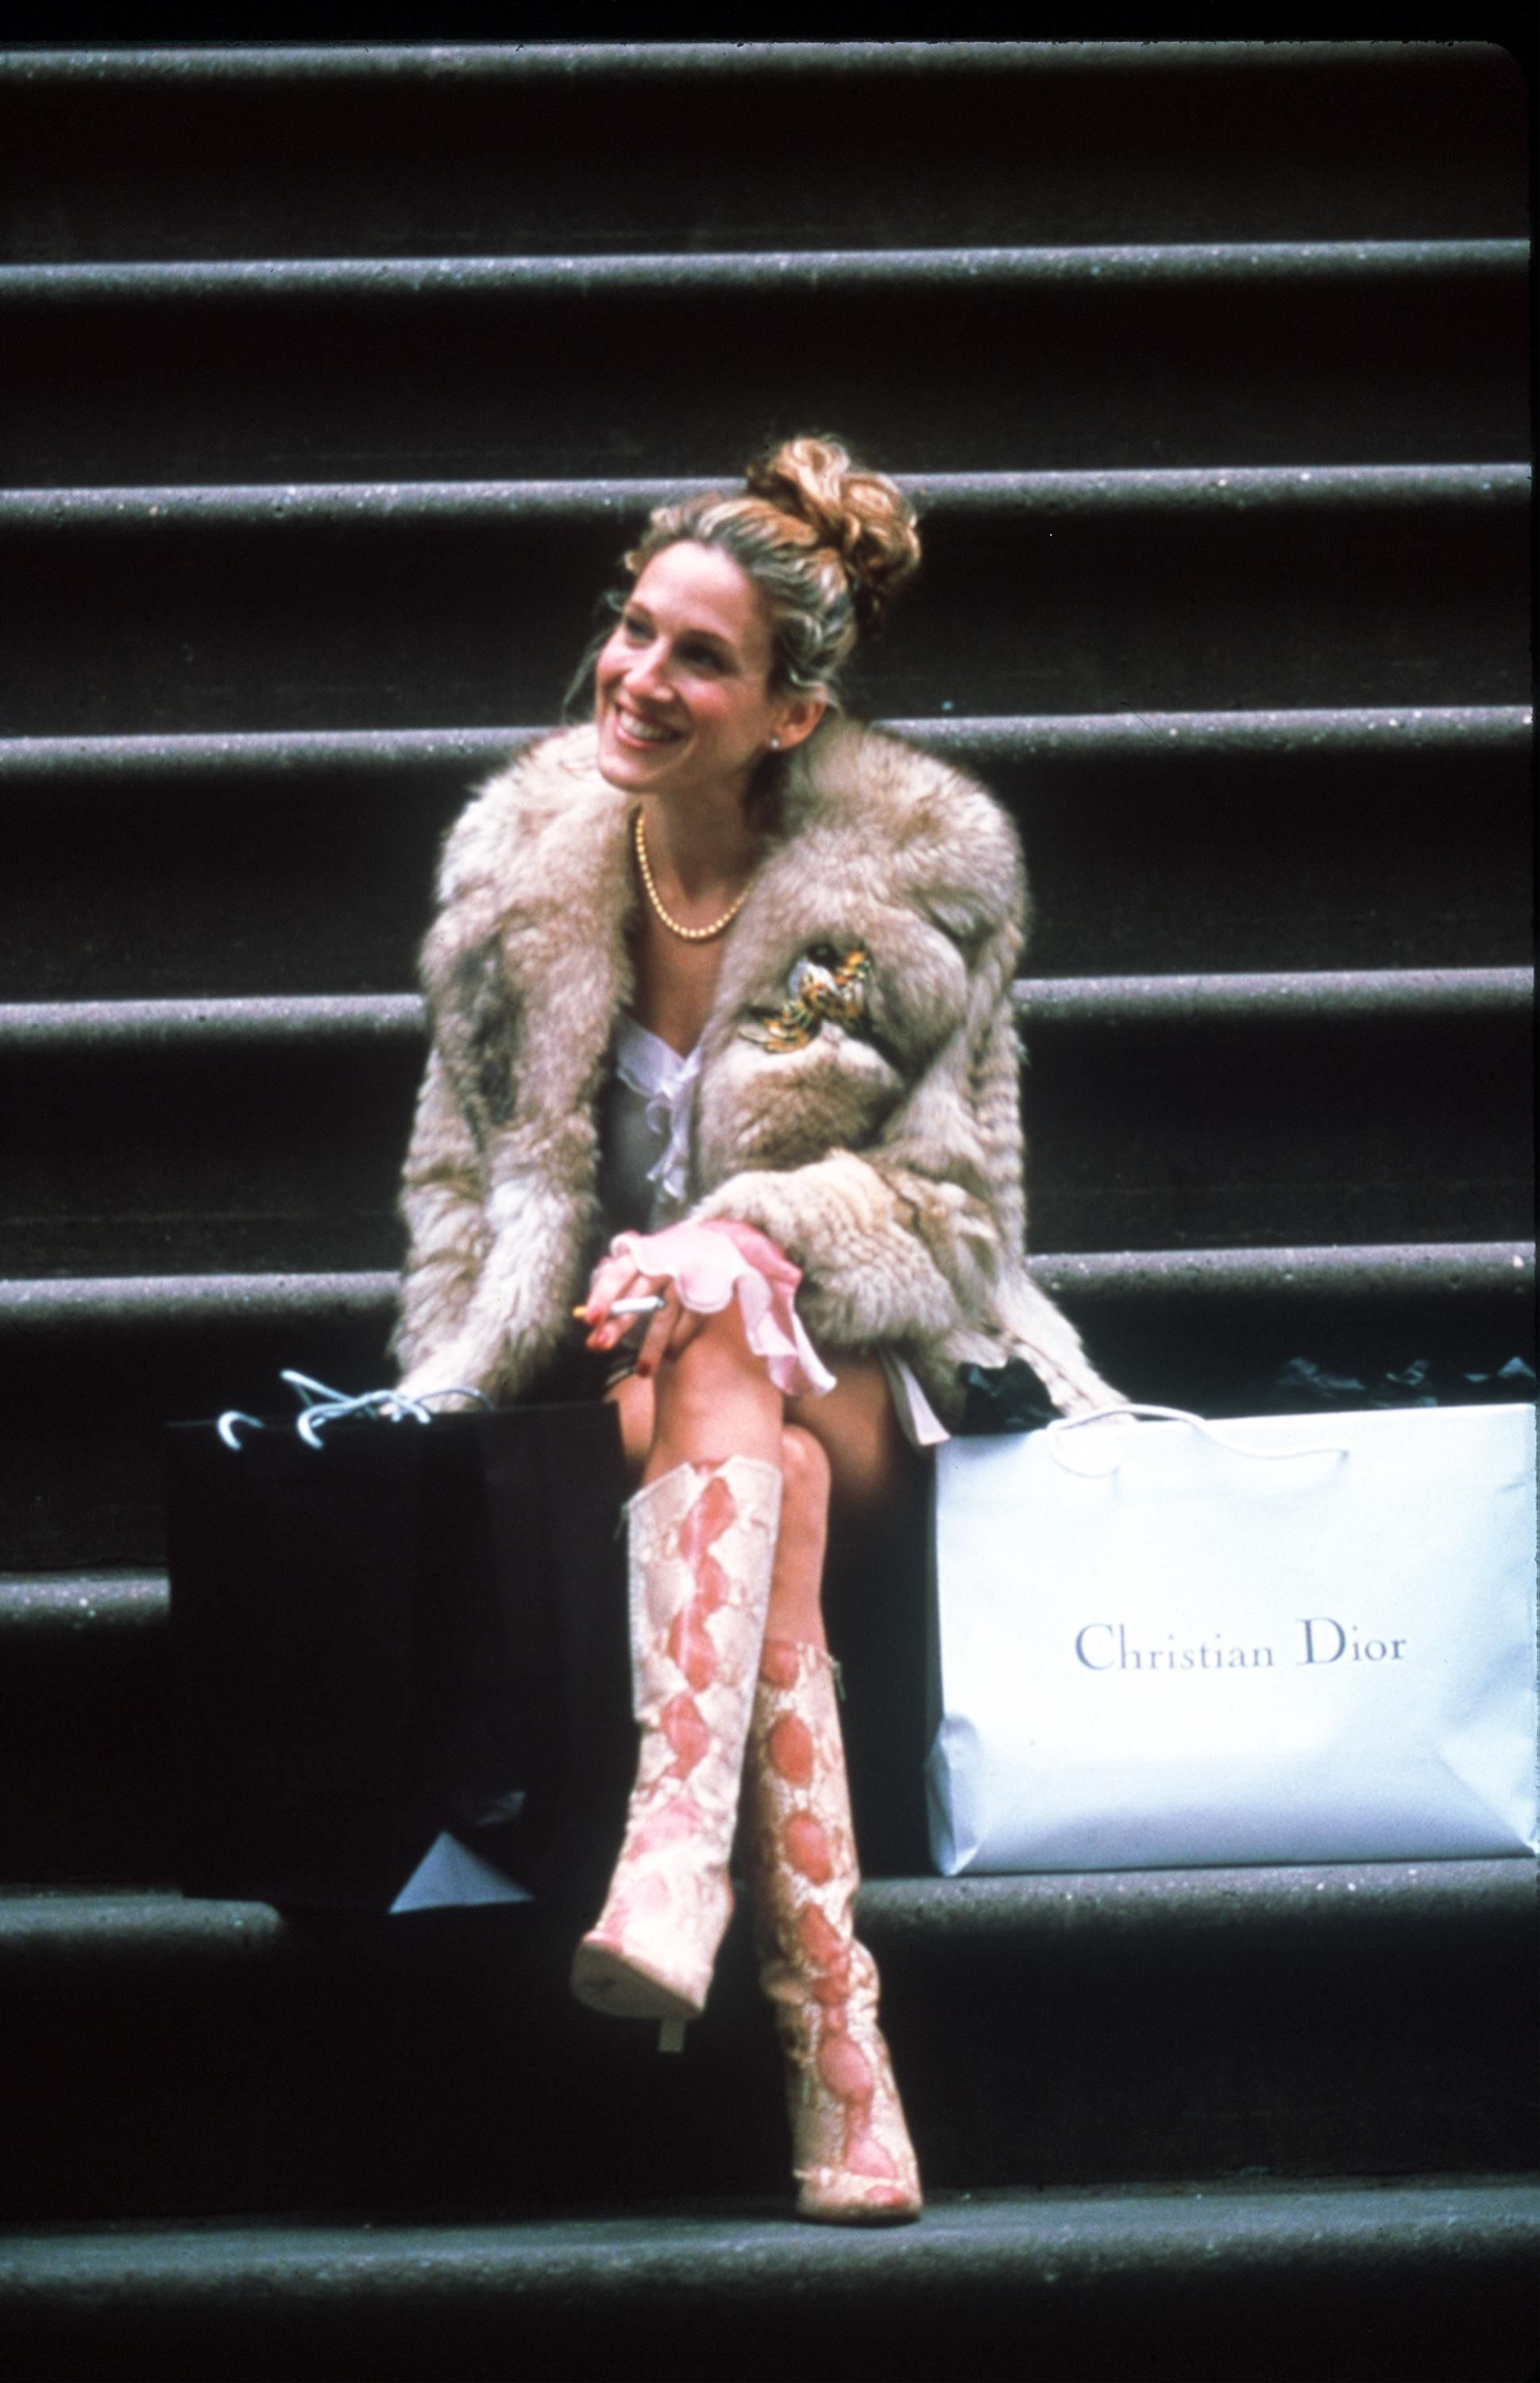 The 7 most iconic 'Sex and the City' fashion items you can still buy today